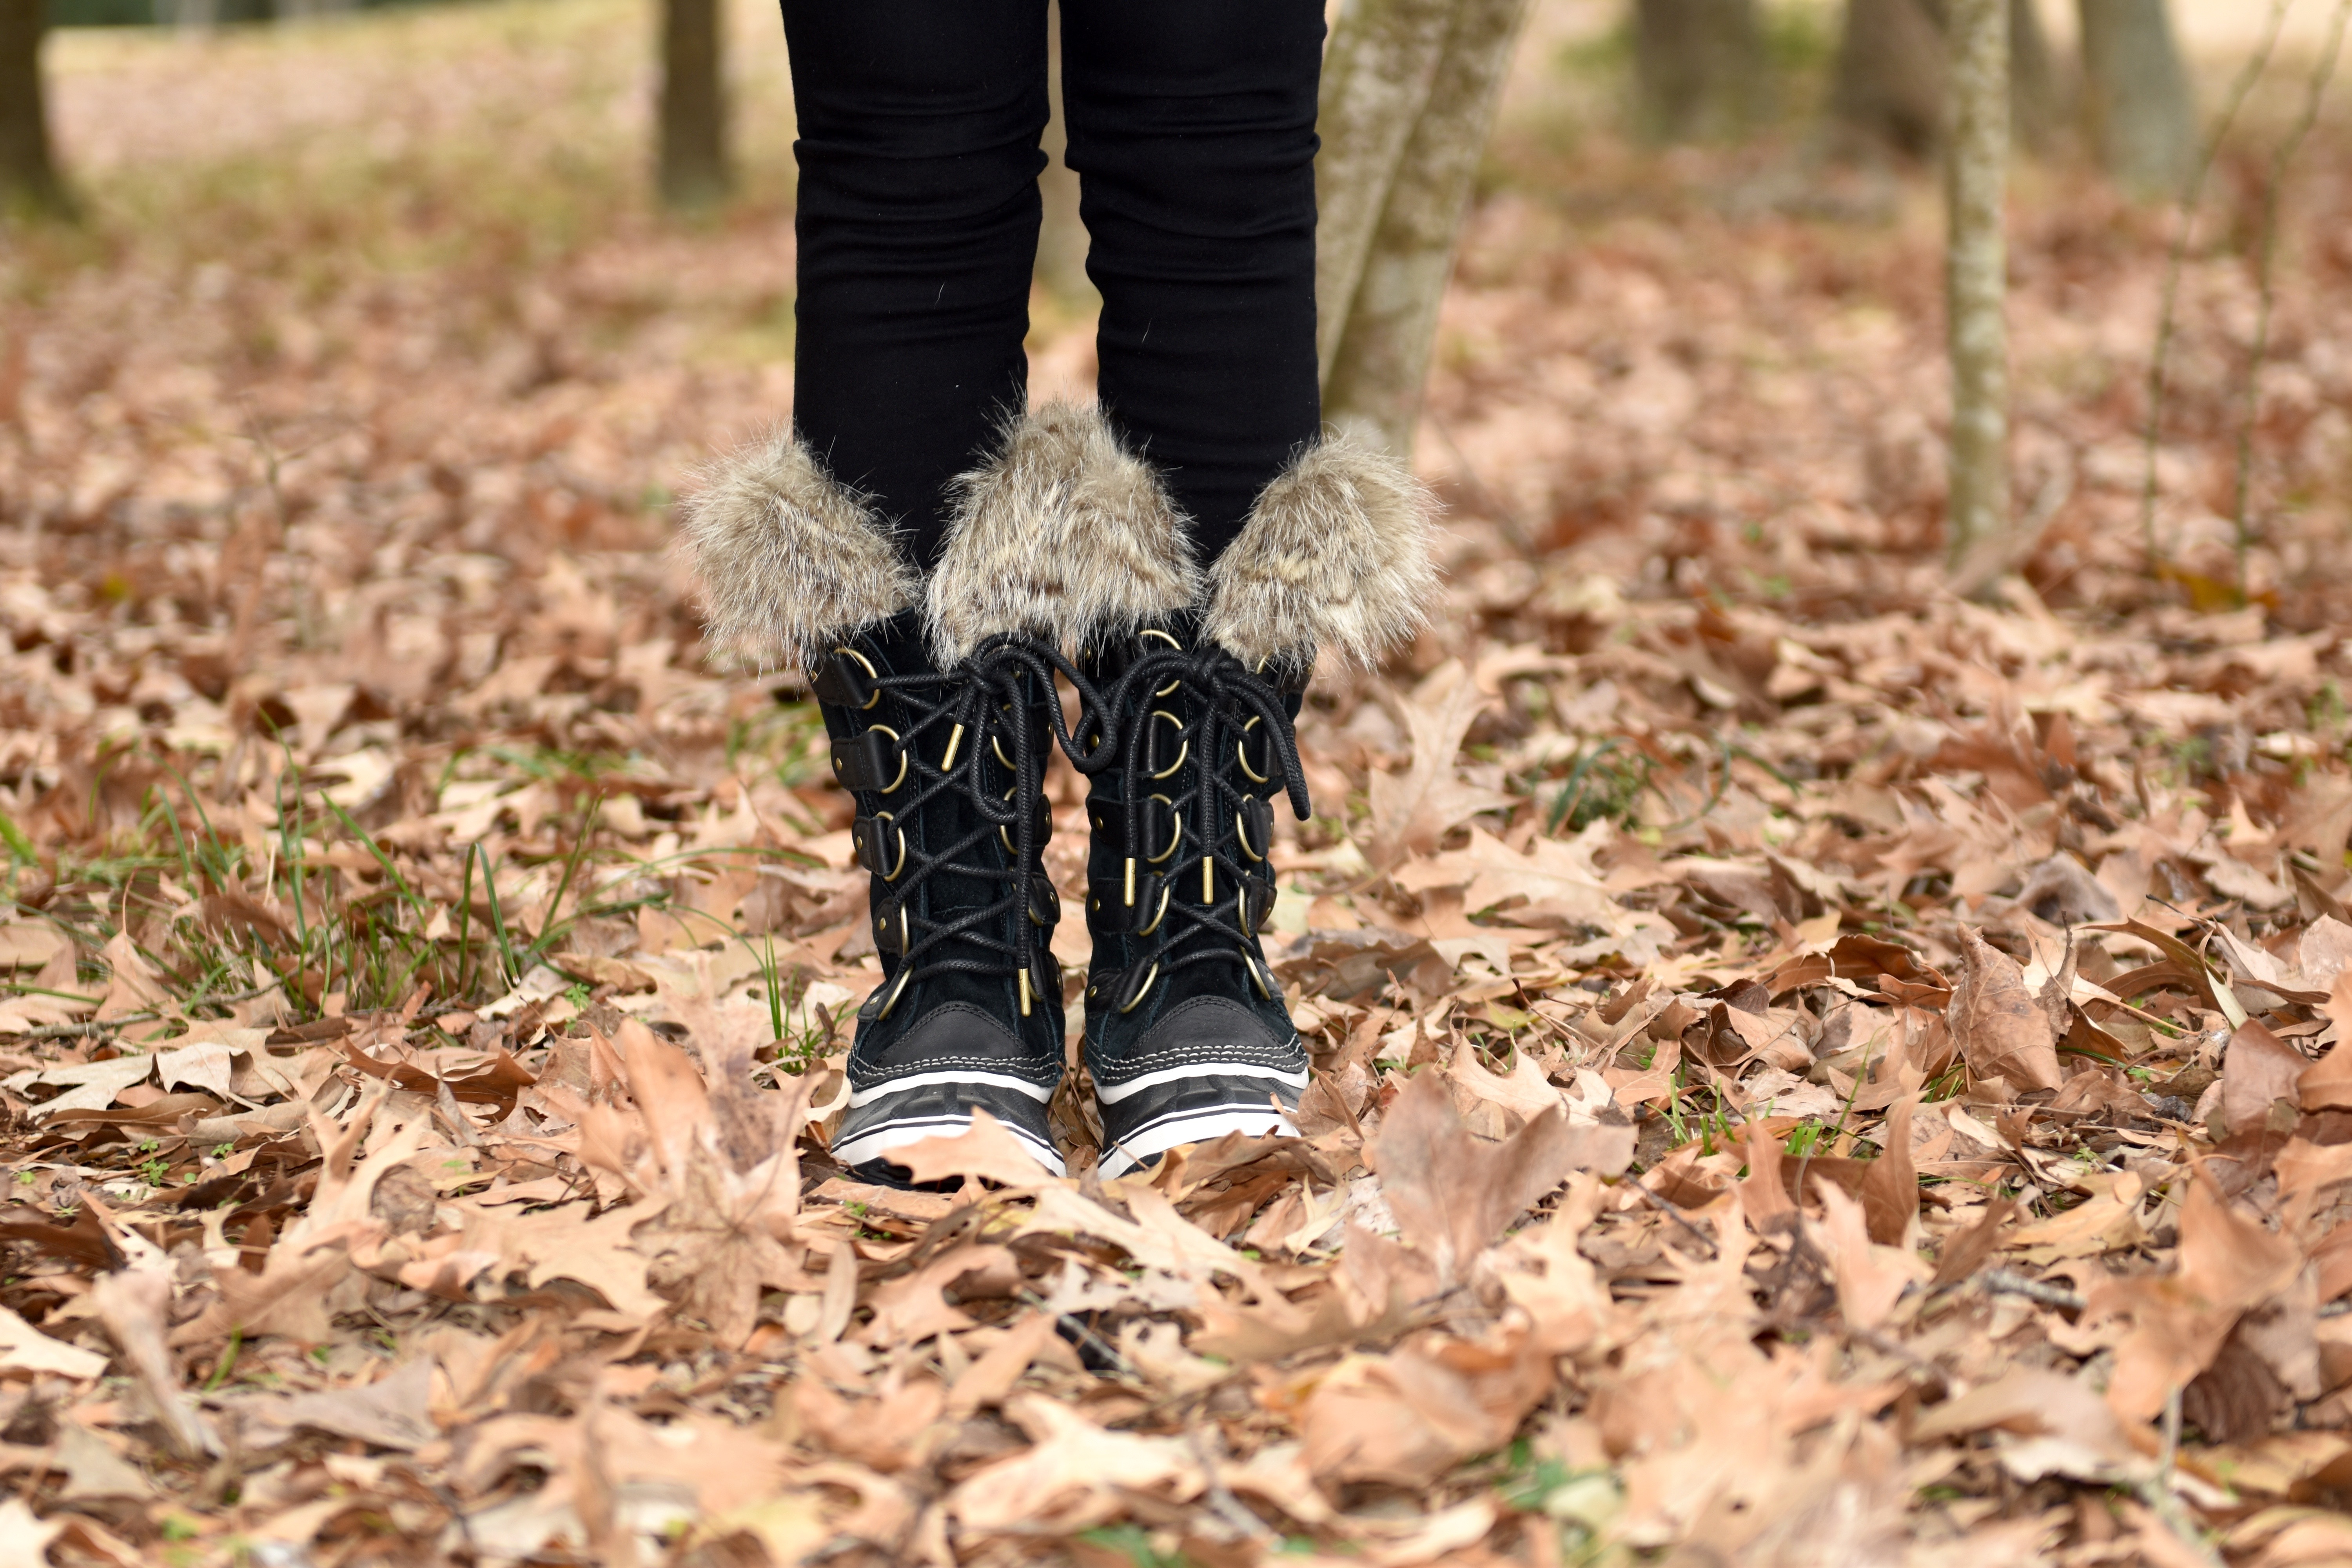 Best winter boots, Best Winter boots, suede boots, over the knee boots, furry boots, rain boots, fashion boots, top winter boot trends, favorite boots,